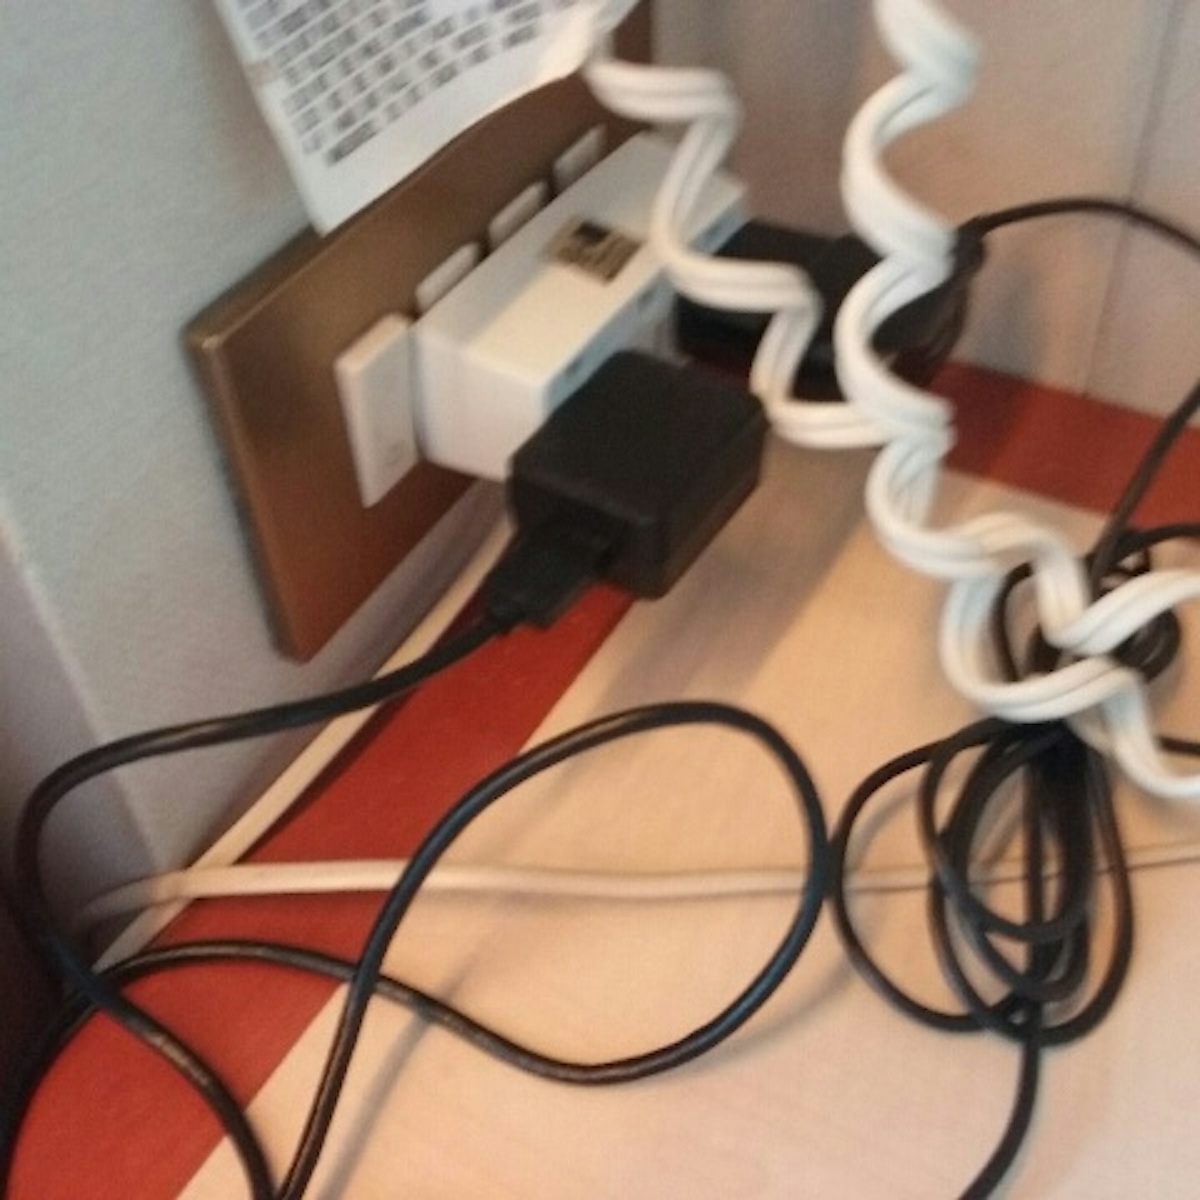 Only two small electrical outlets in balcony stateroom. Hard to plug two it